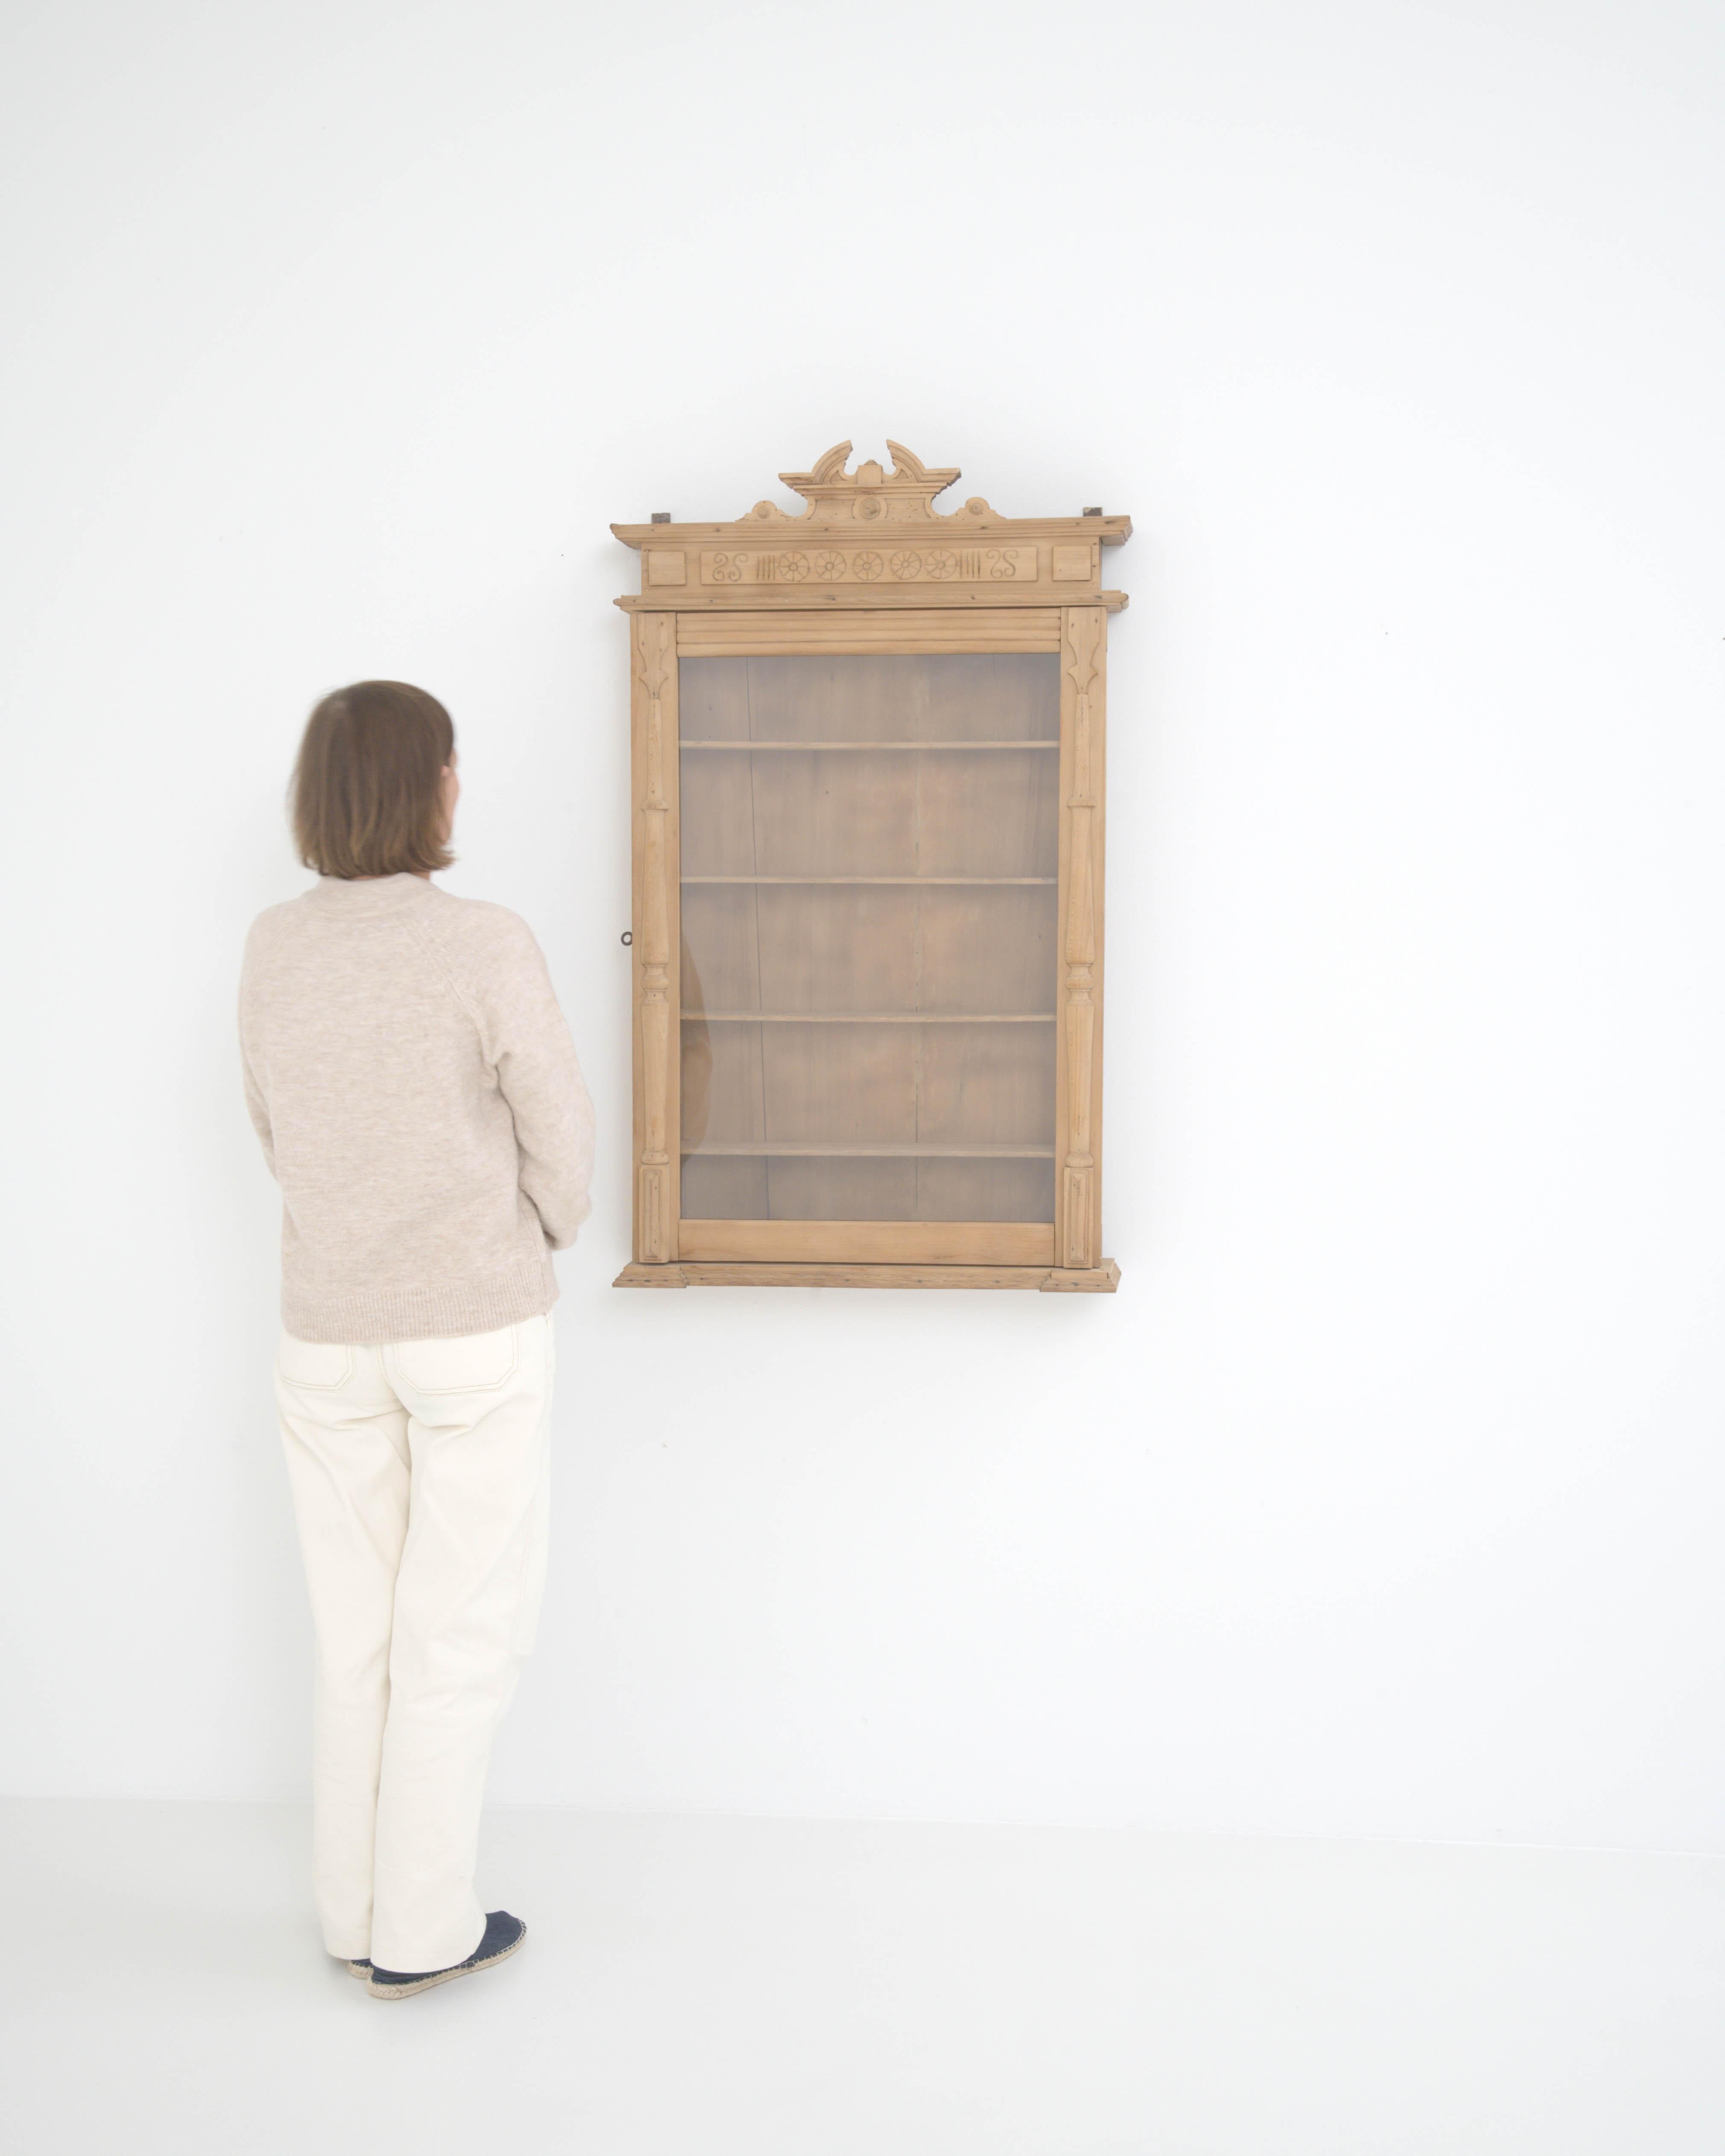 Radiating the distinctive charm of French country furniture, this slender wall vitrine was made in France circa 1900. Its carved wooden ornament draws attention, and announces this piece’s purpose: both to protect and display its contents. The